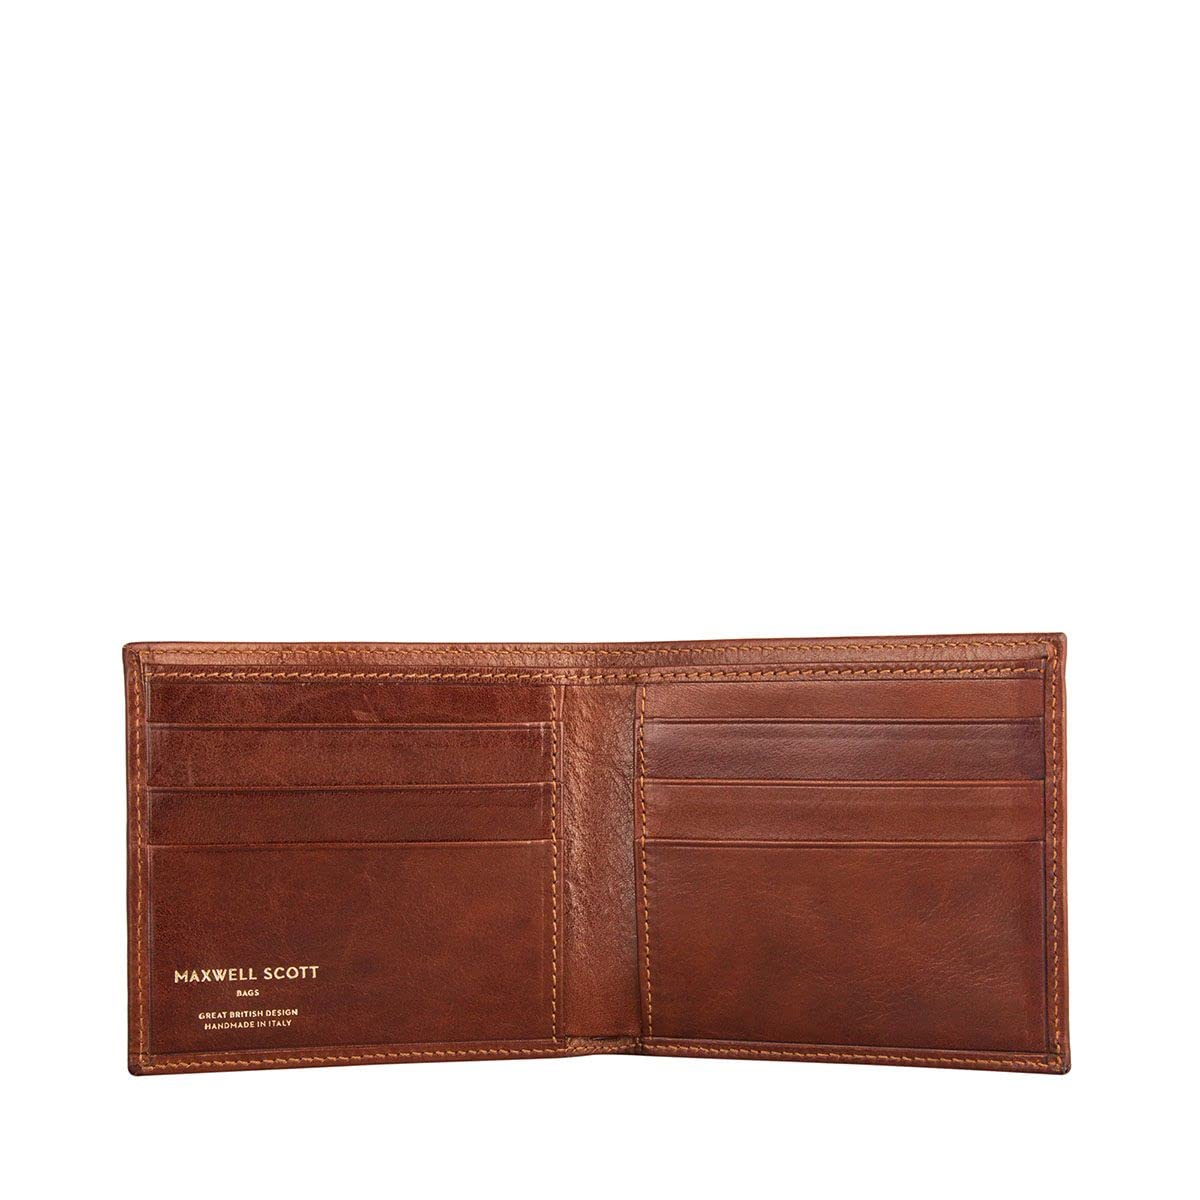 Maxwell Scott - Personalized Luxury Leather RFID Billfold Wallet for Men - The Vittore RFID - Chestnut Tan